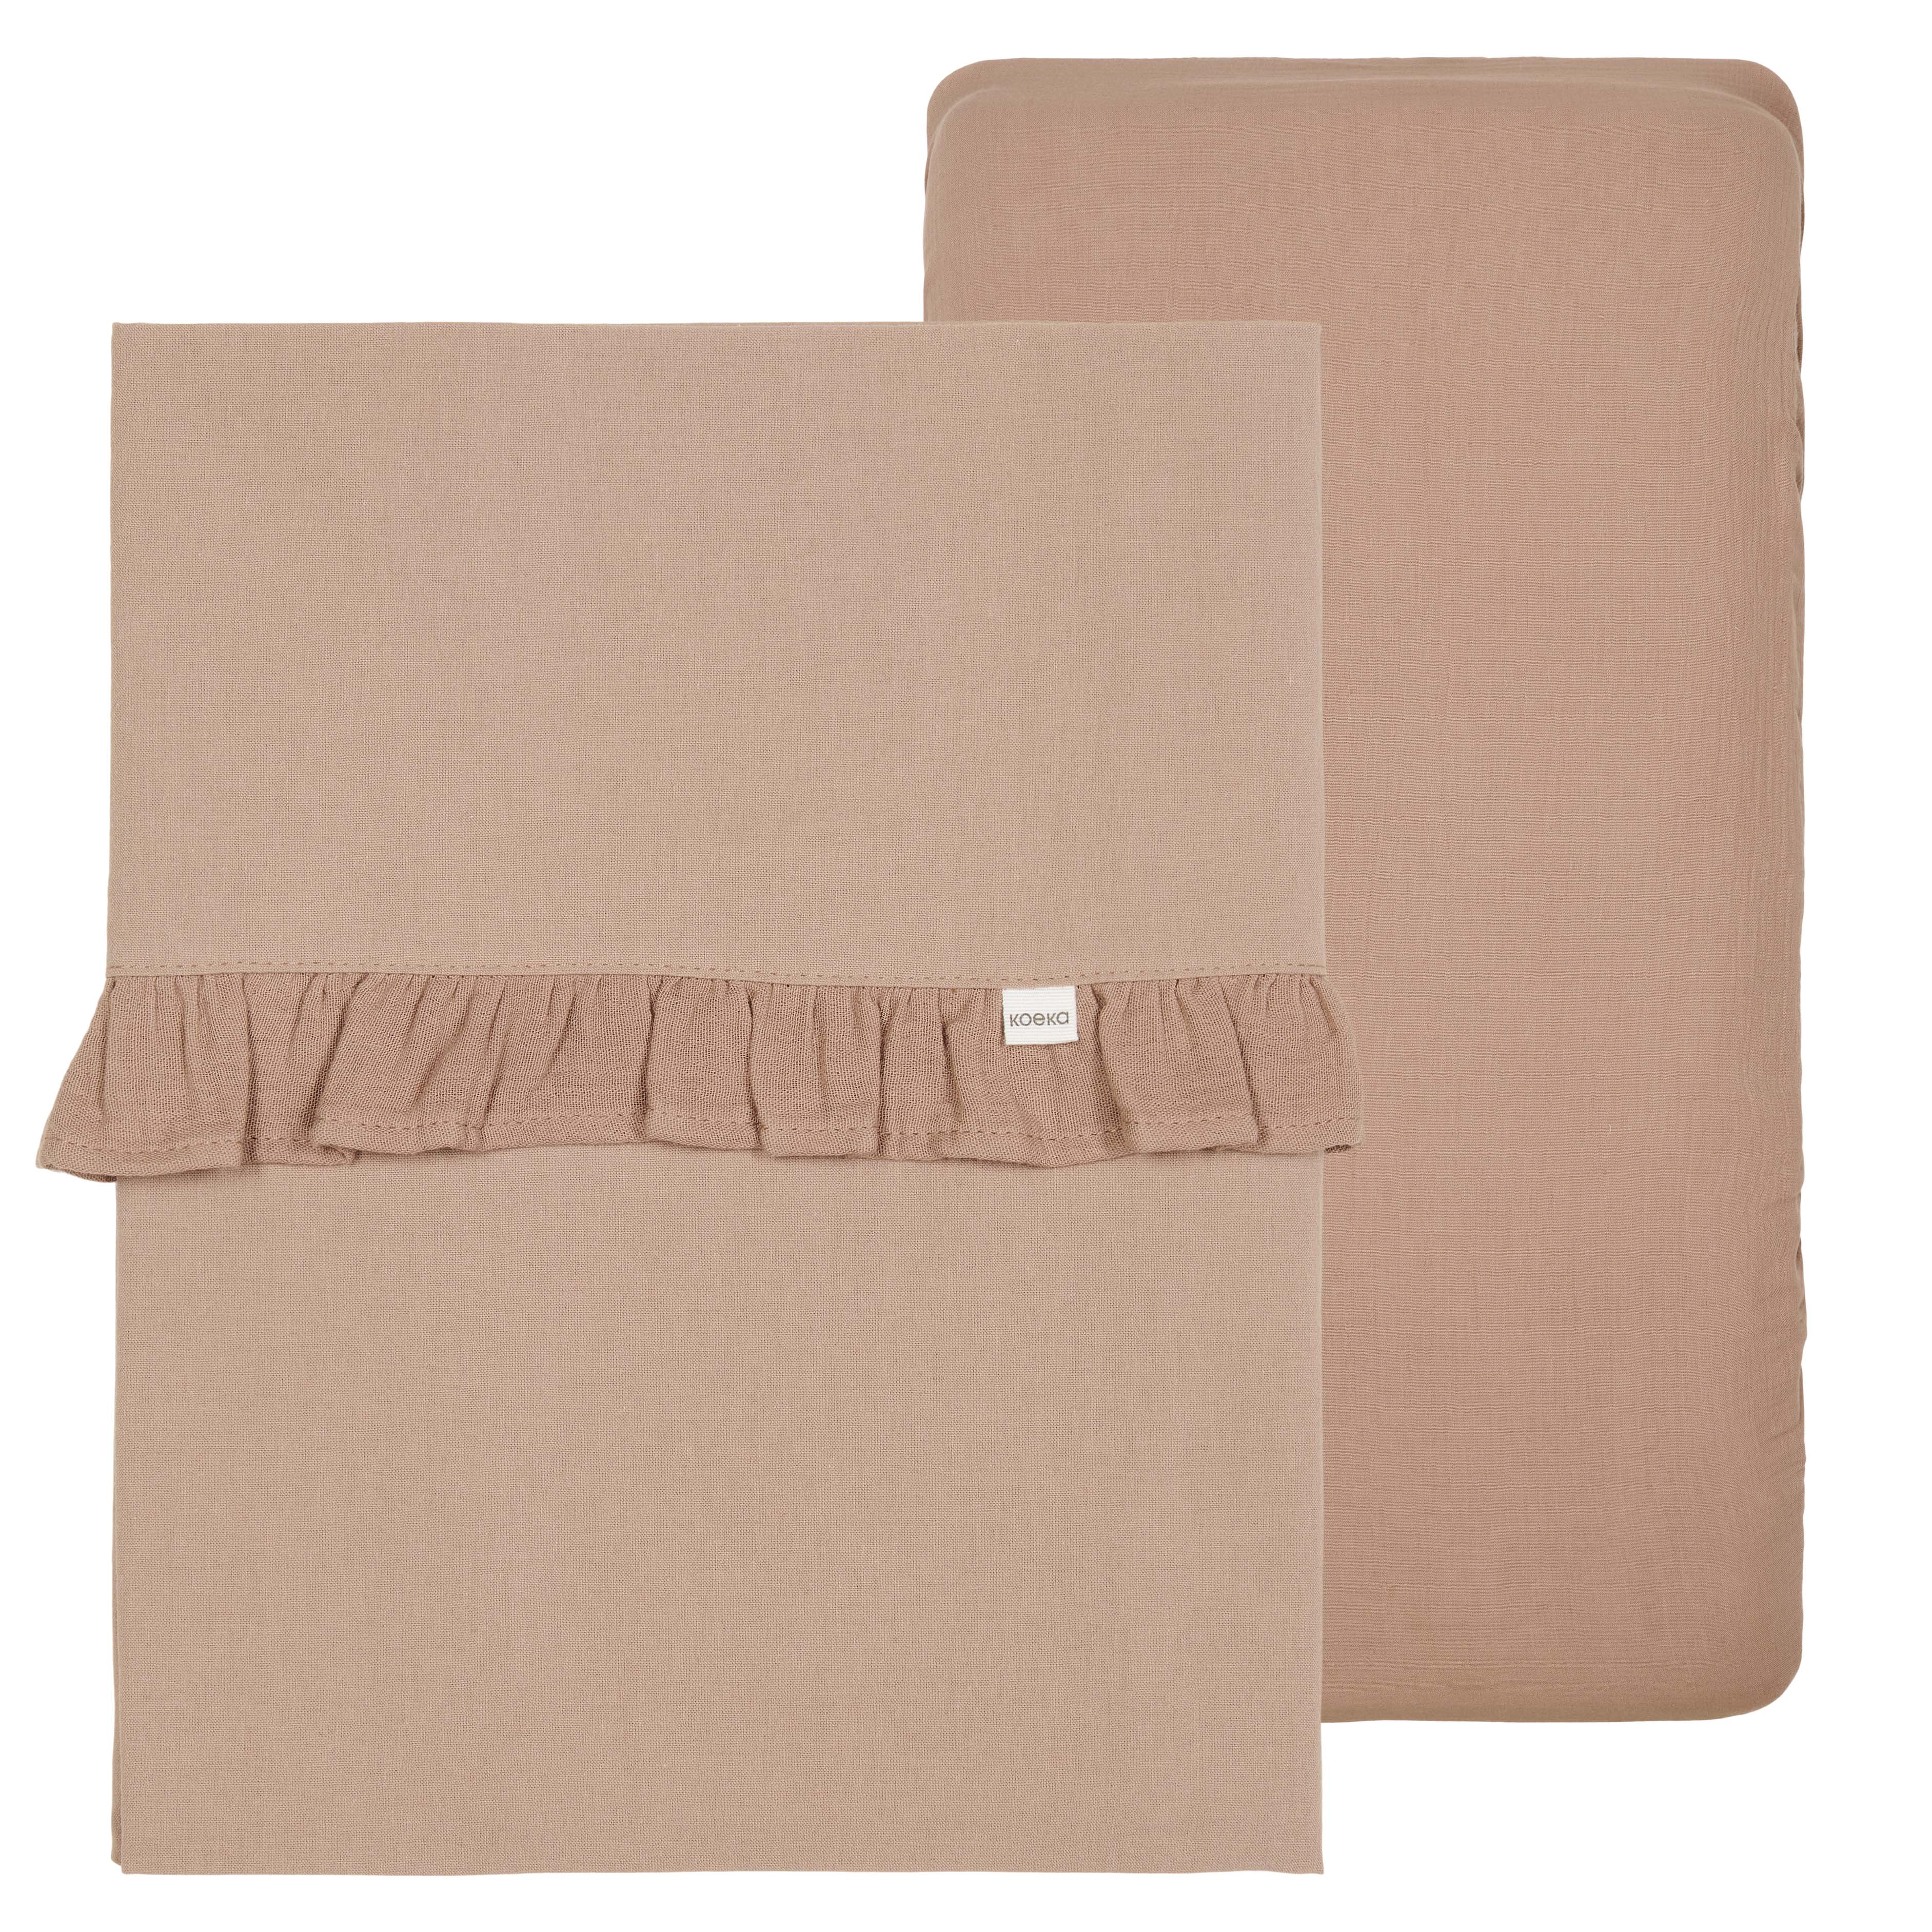 Cot sheet and fitted sheet ruffle combi pack Faroo caffe